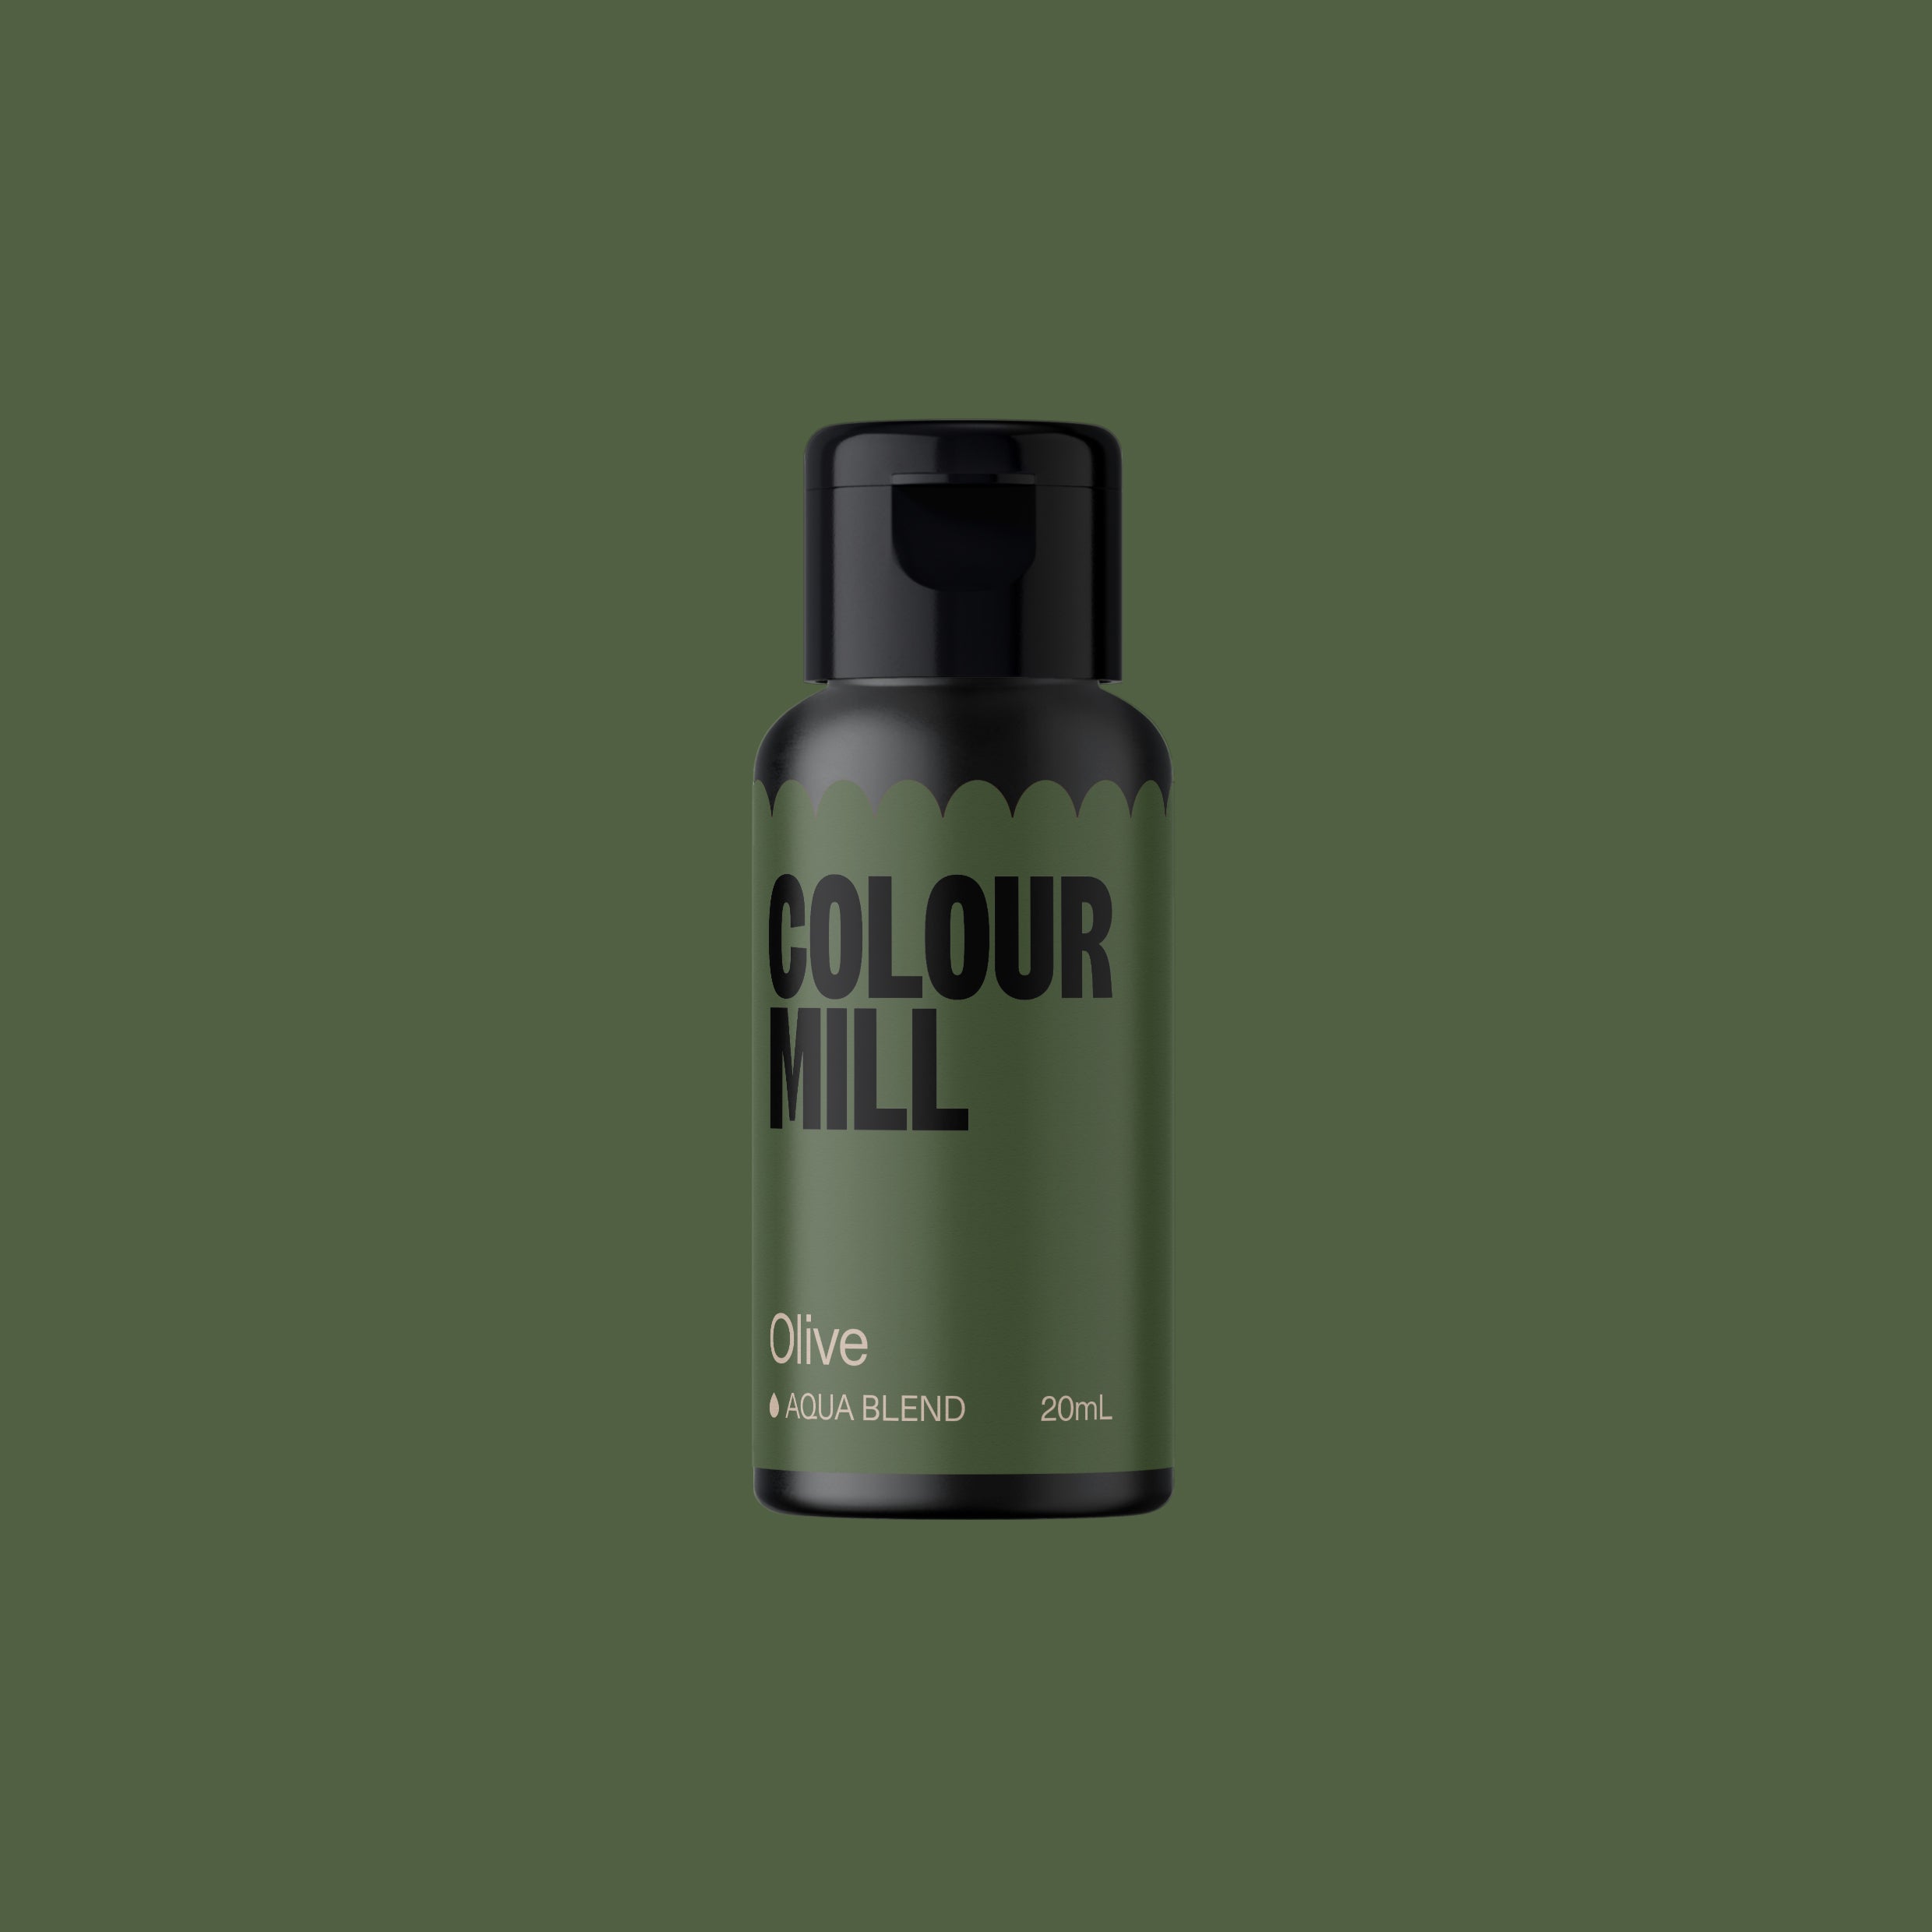 Colour Mill- Olive